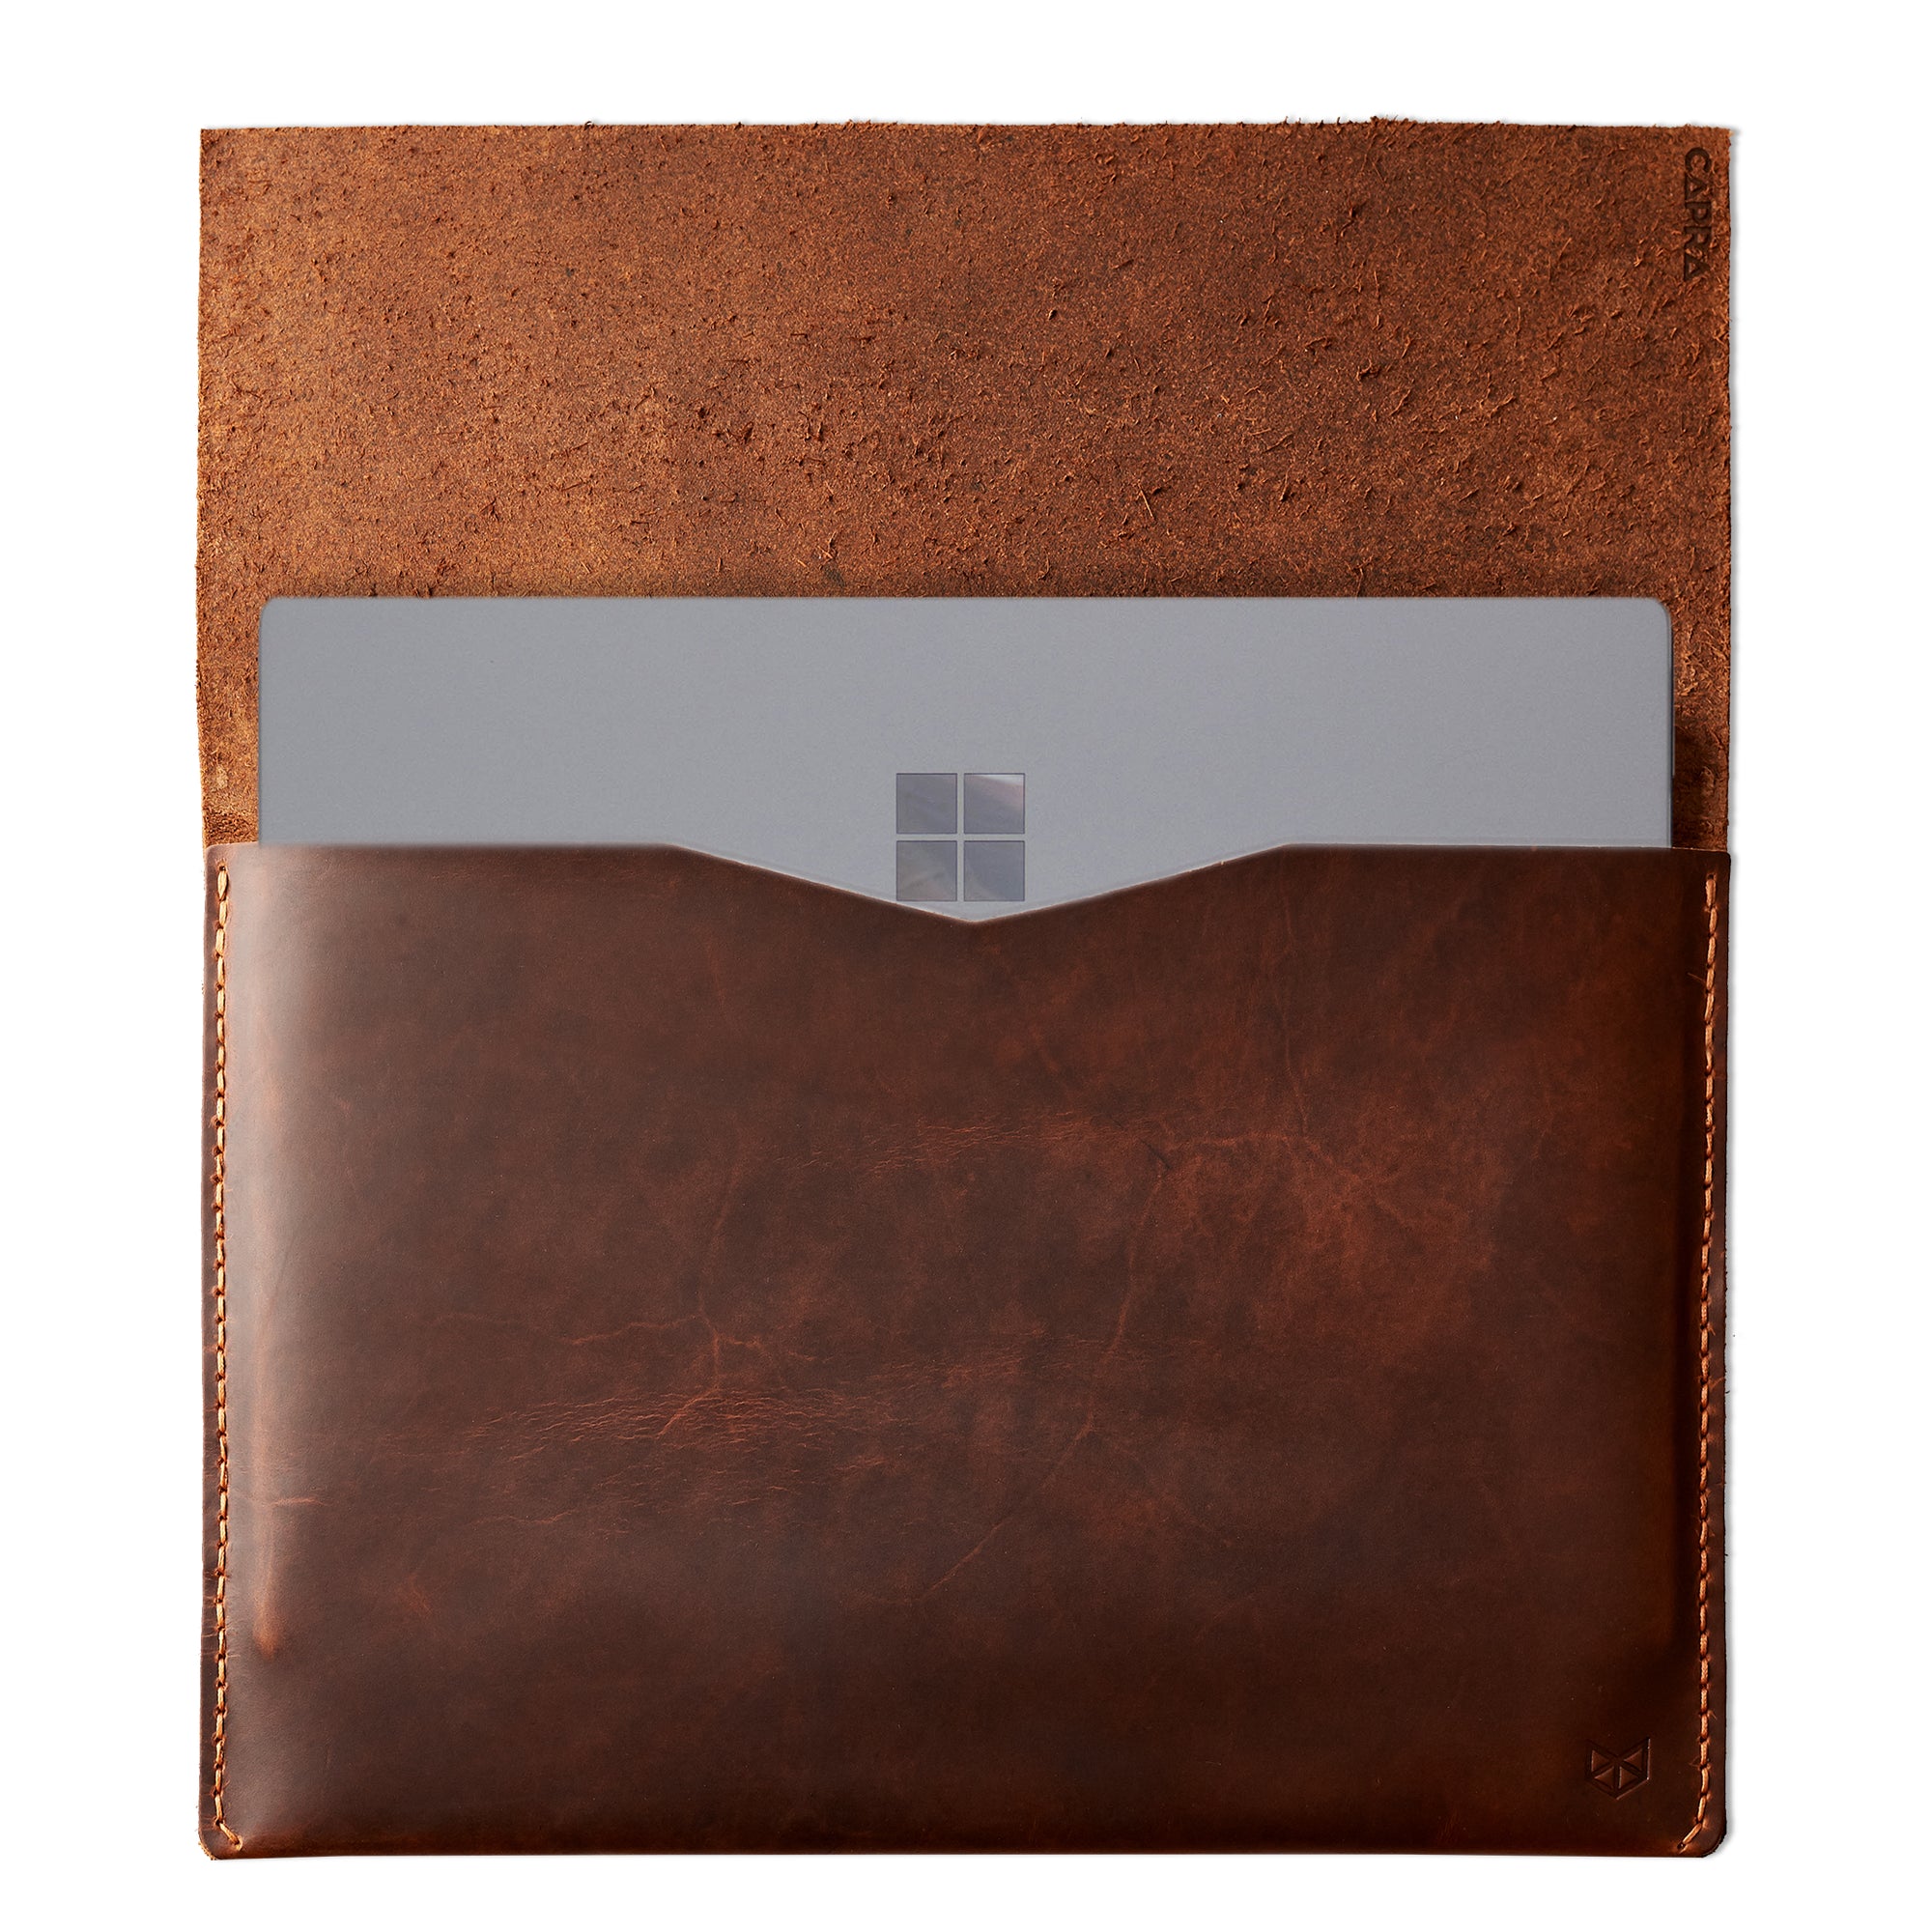 Tan brown leather Macbook pro touch bar sleeve. Designer unique mens cases. Hand stitched Macbook Pro sleeve